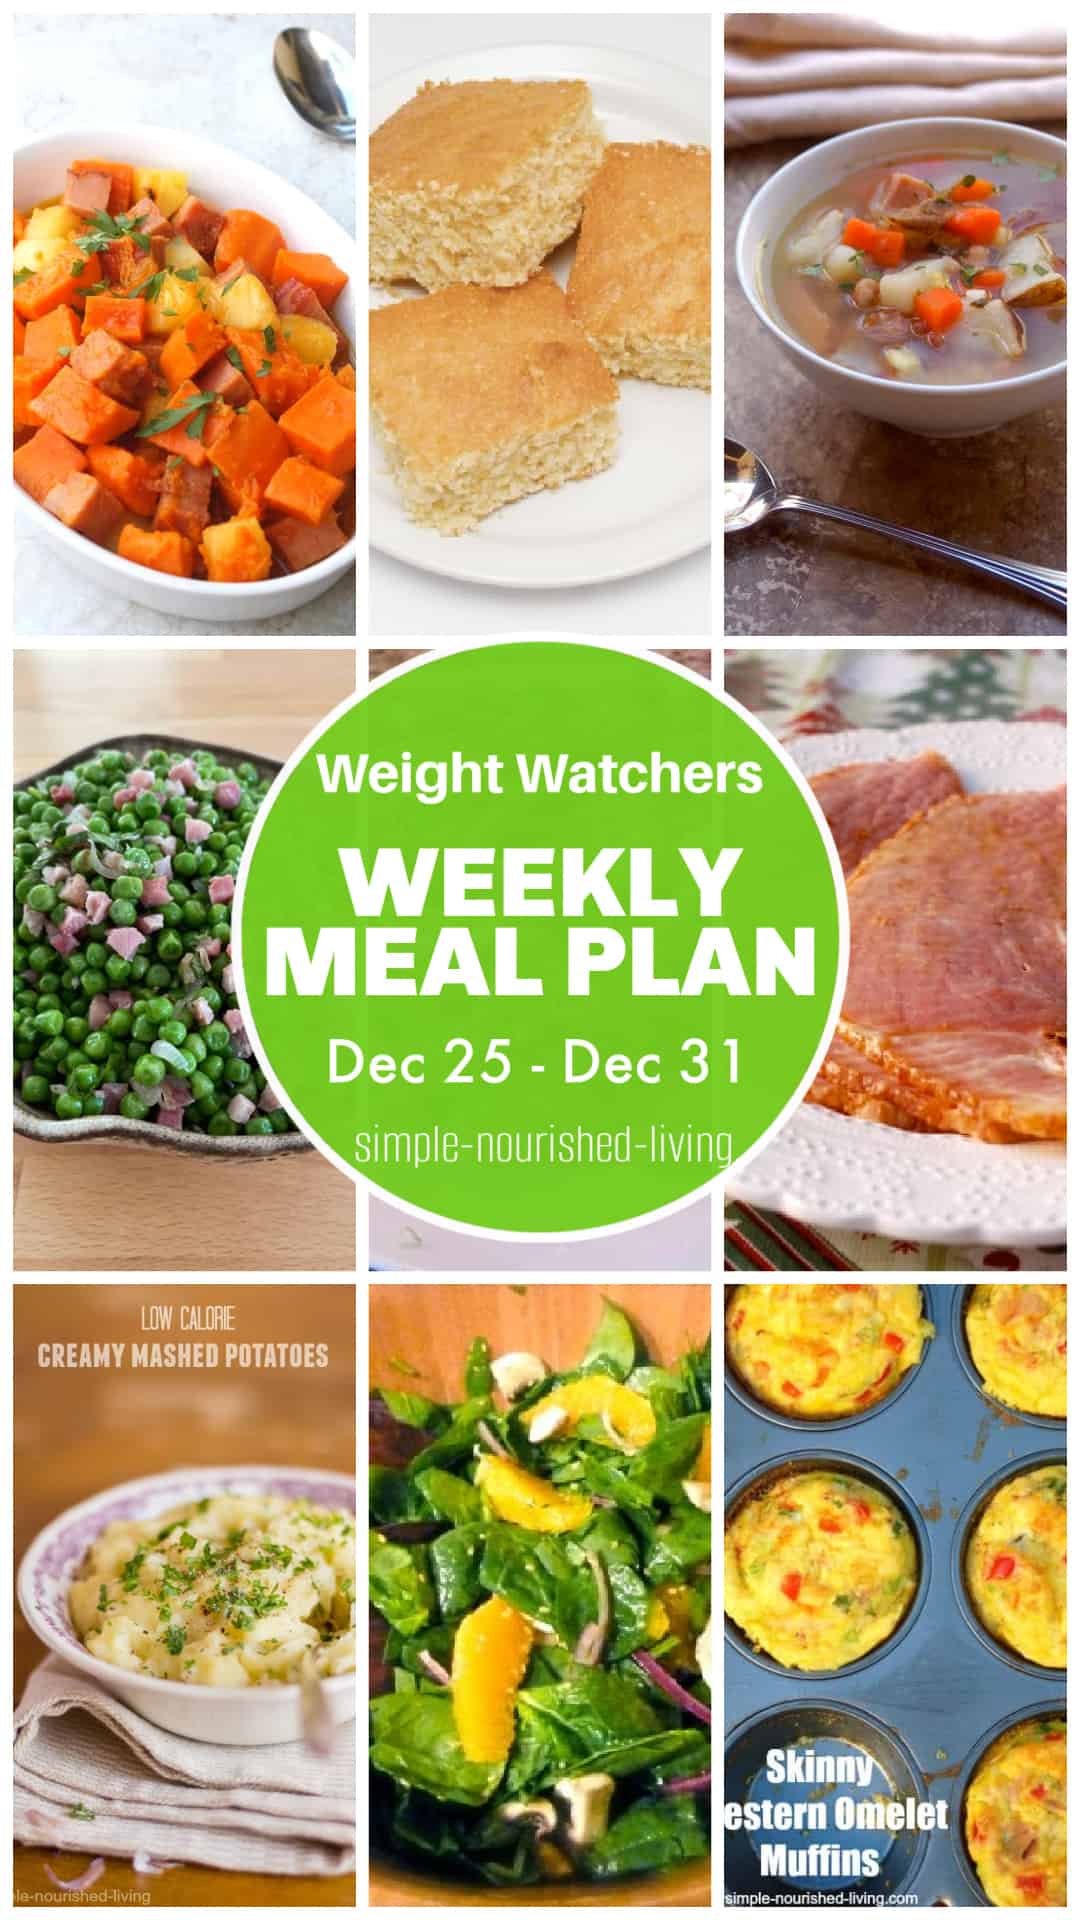 9 frame food photo collage featuring recipes from this weeks meal plan for WeightWatchers